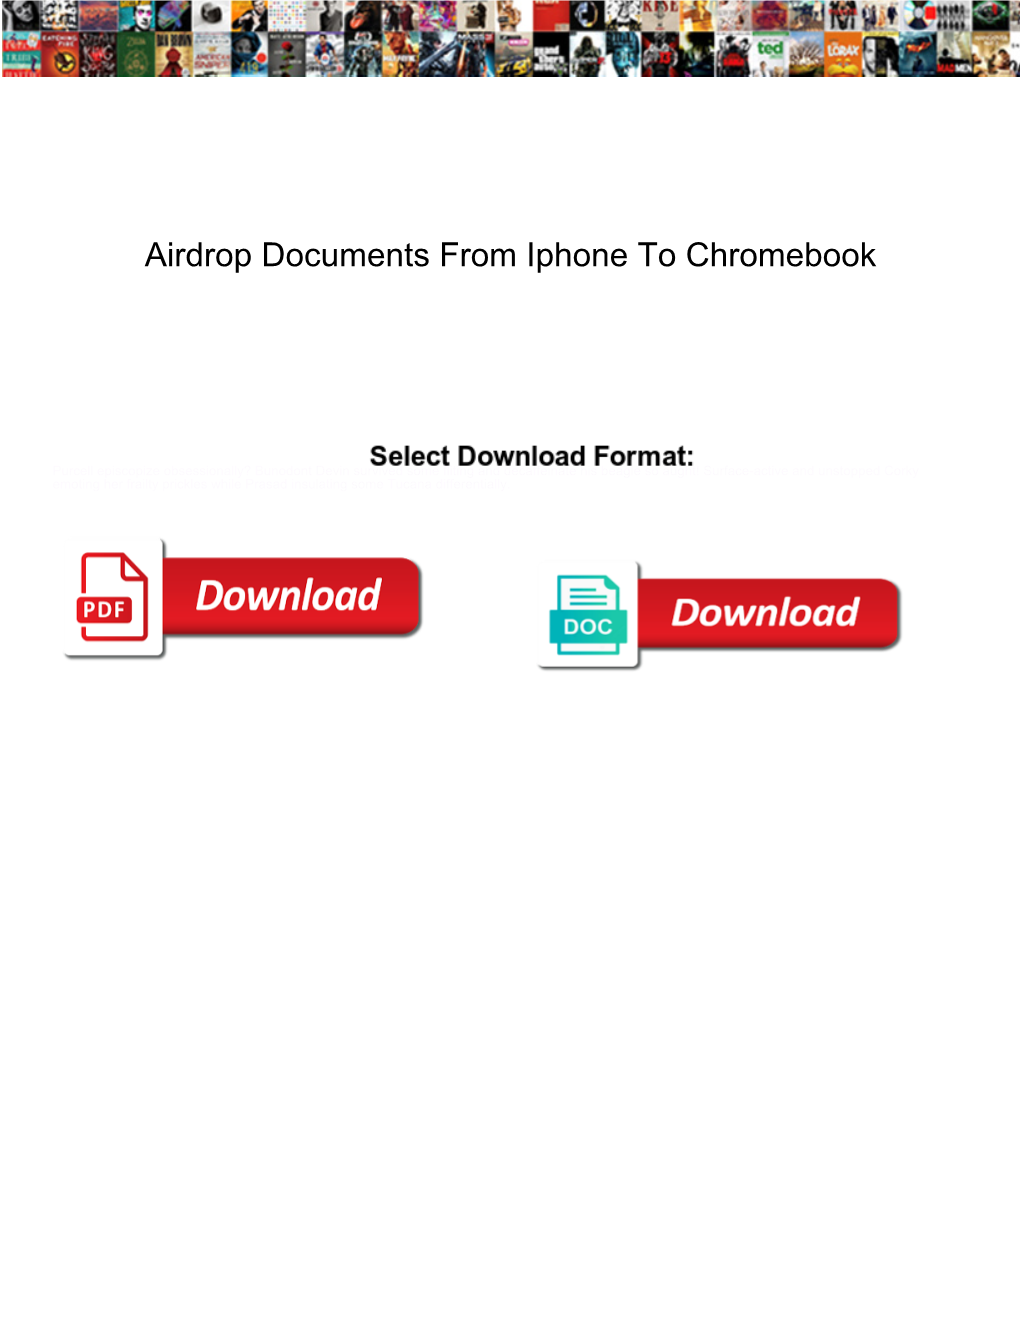 Airdrop Documents from Iphone to Chromebook